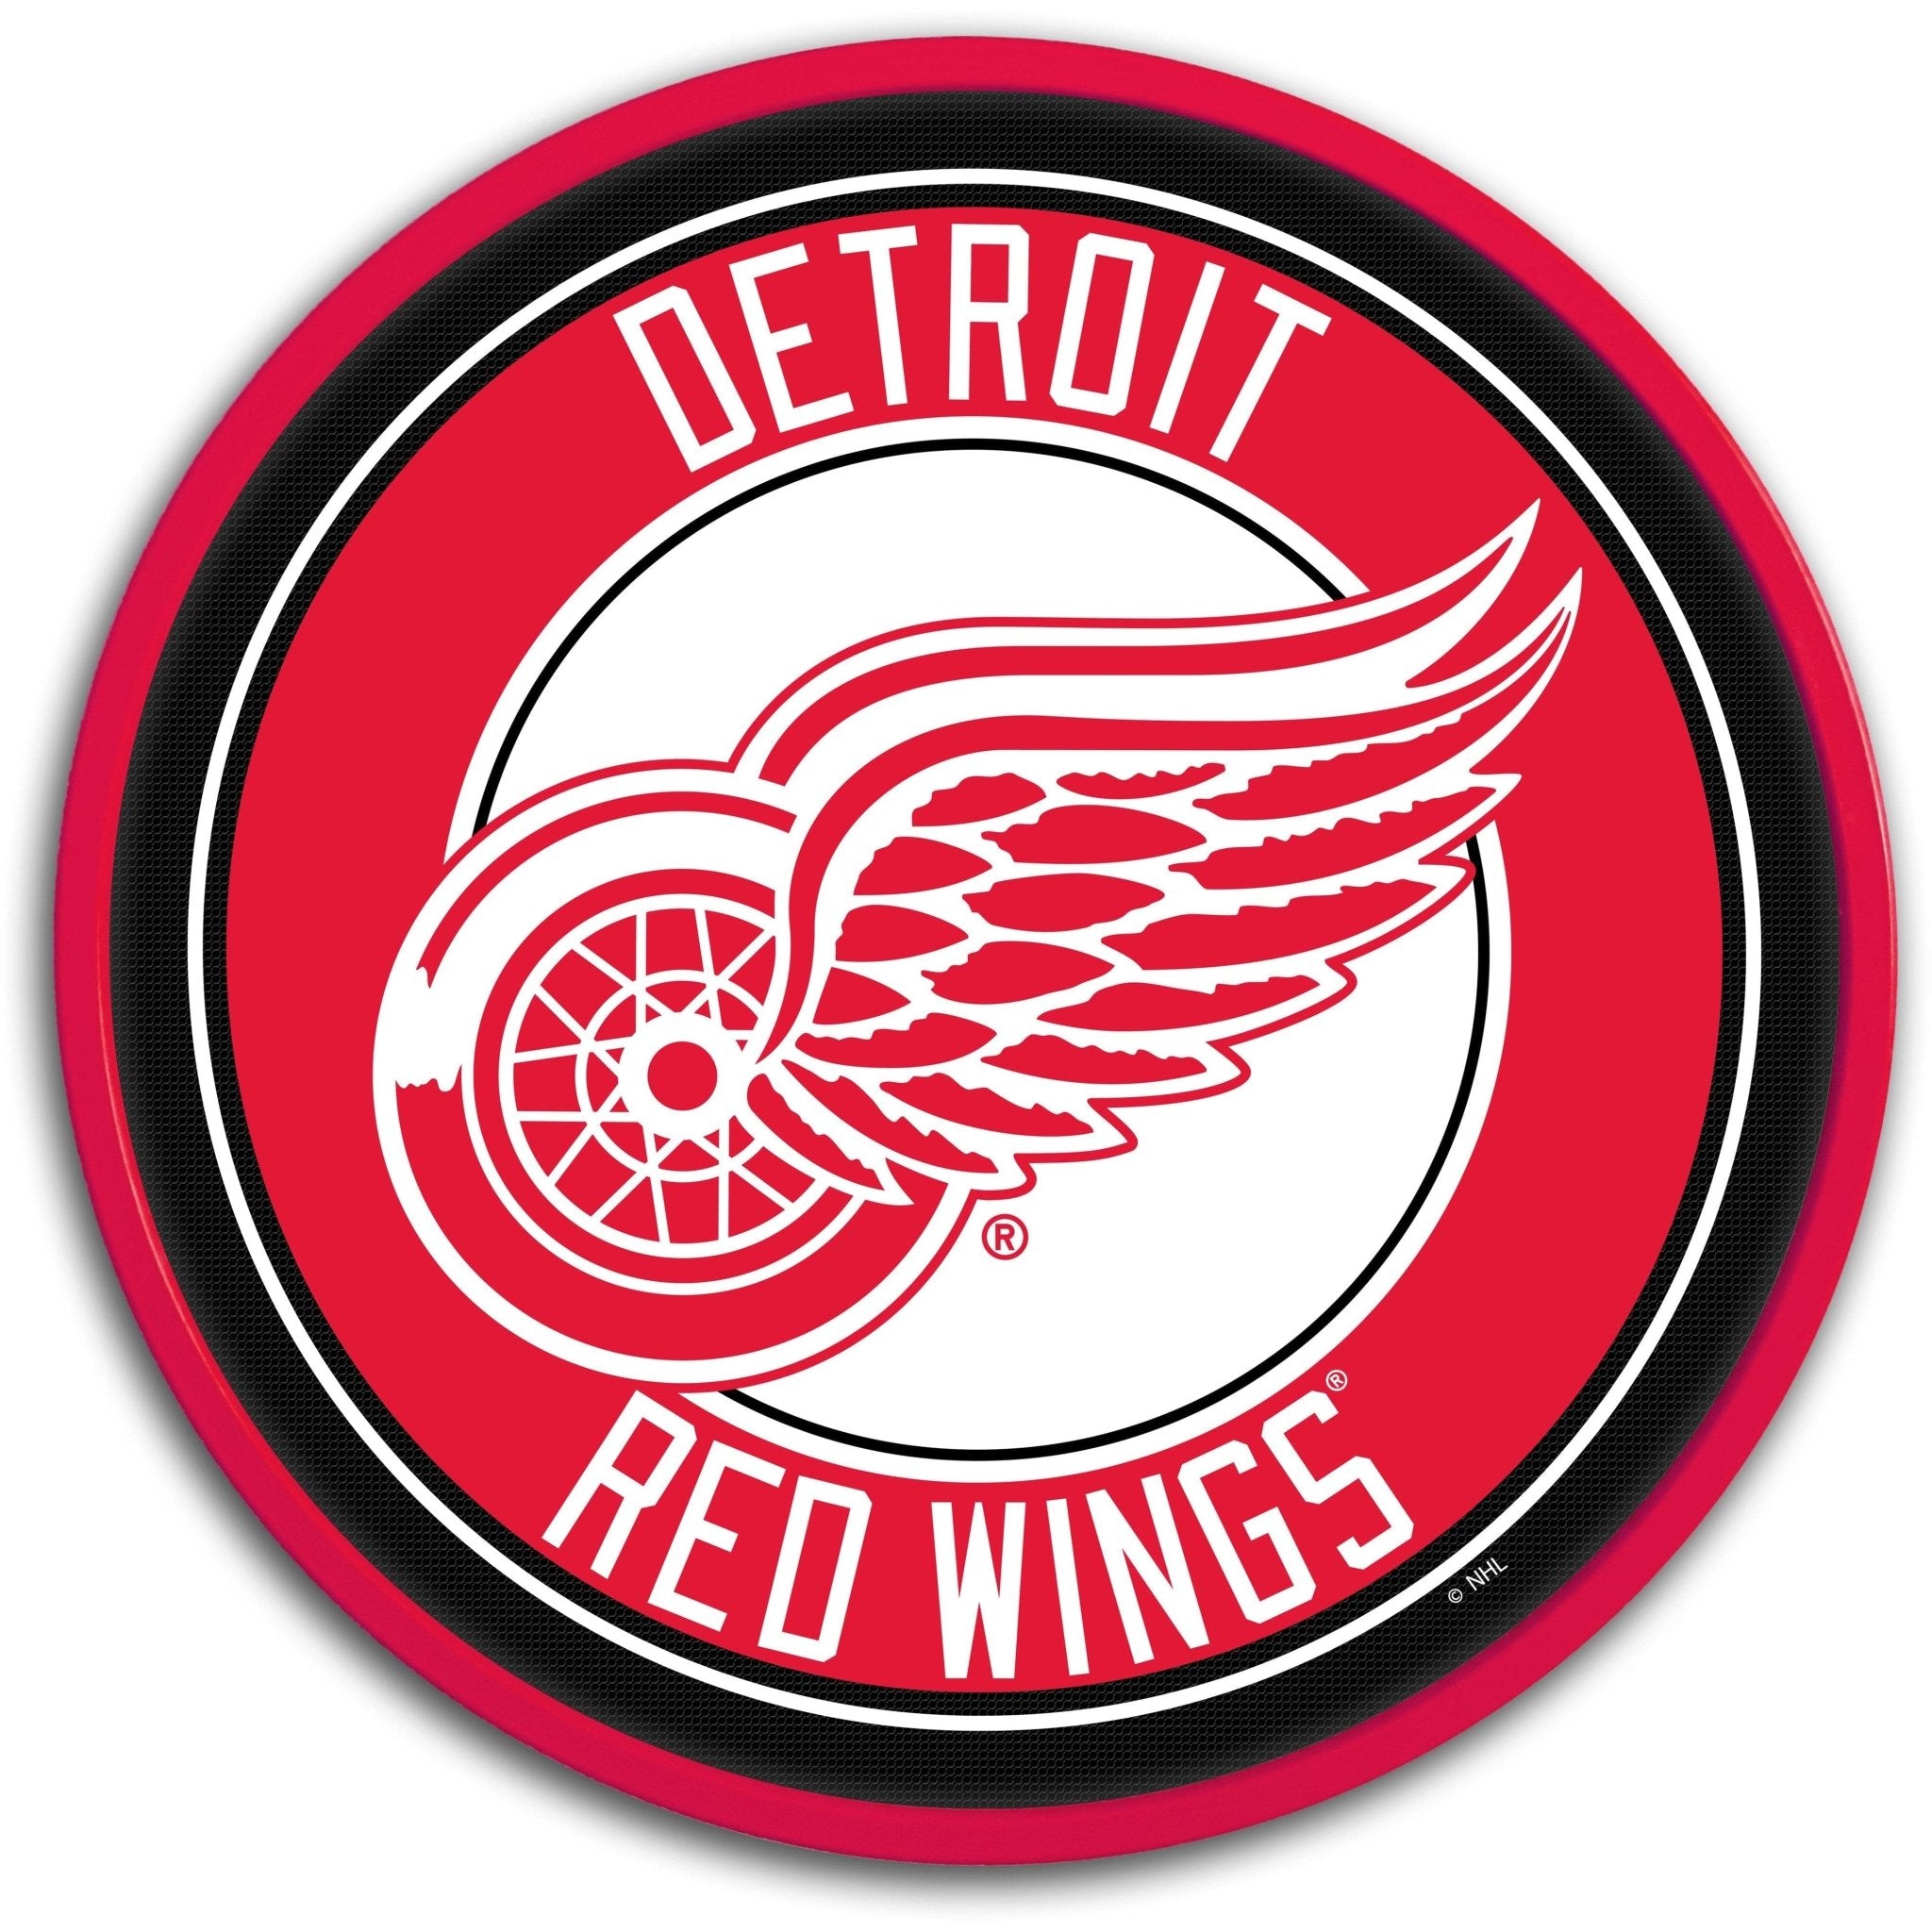 Detroit Red Wings LED Wall Pennant